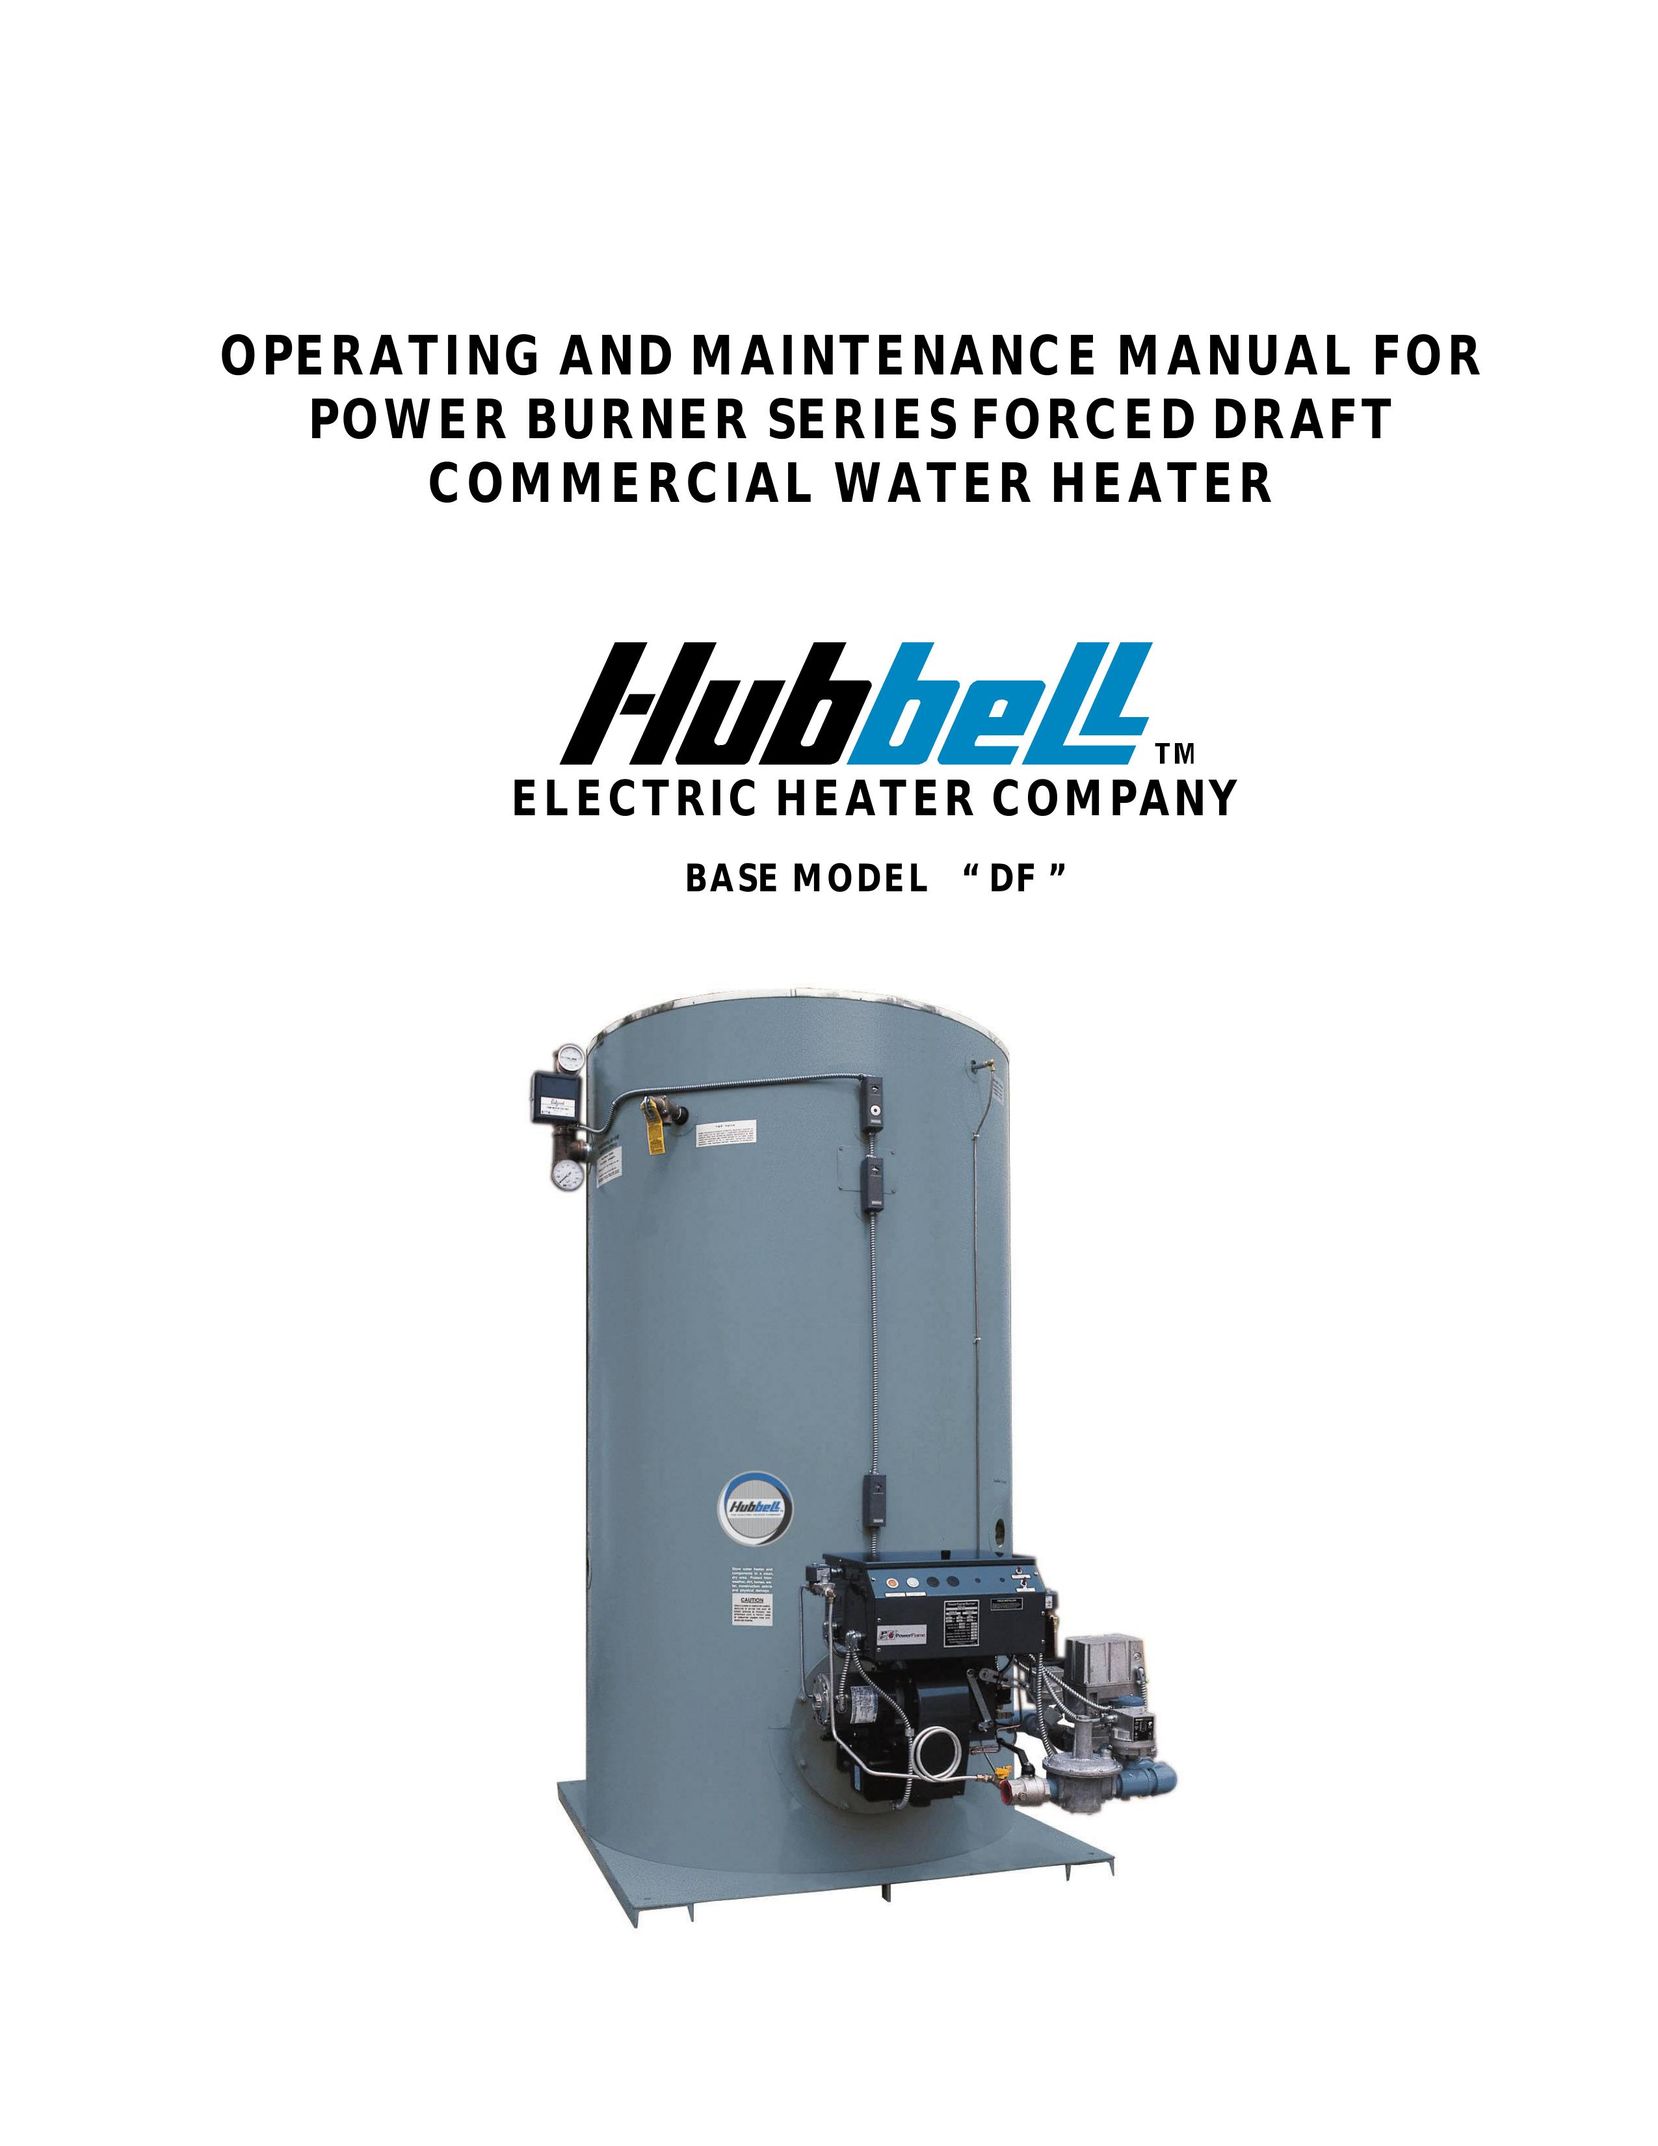 Hubbell Electric Heater Company WATER HEATER DF Water Heater User Manual